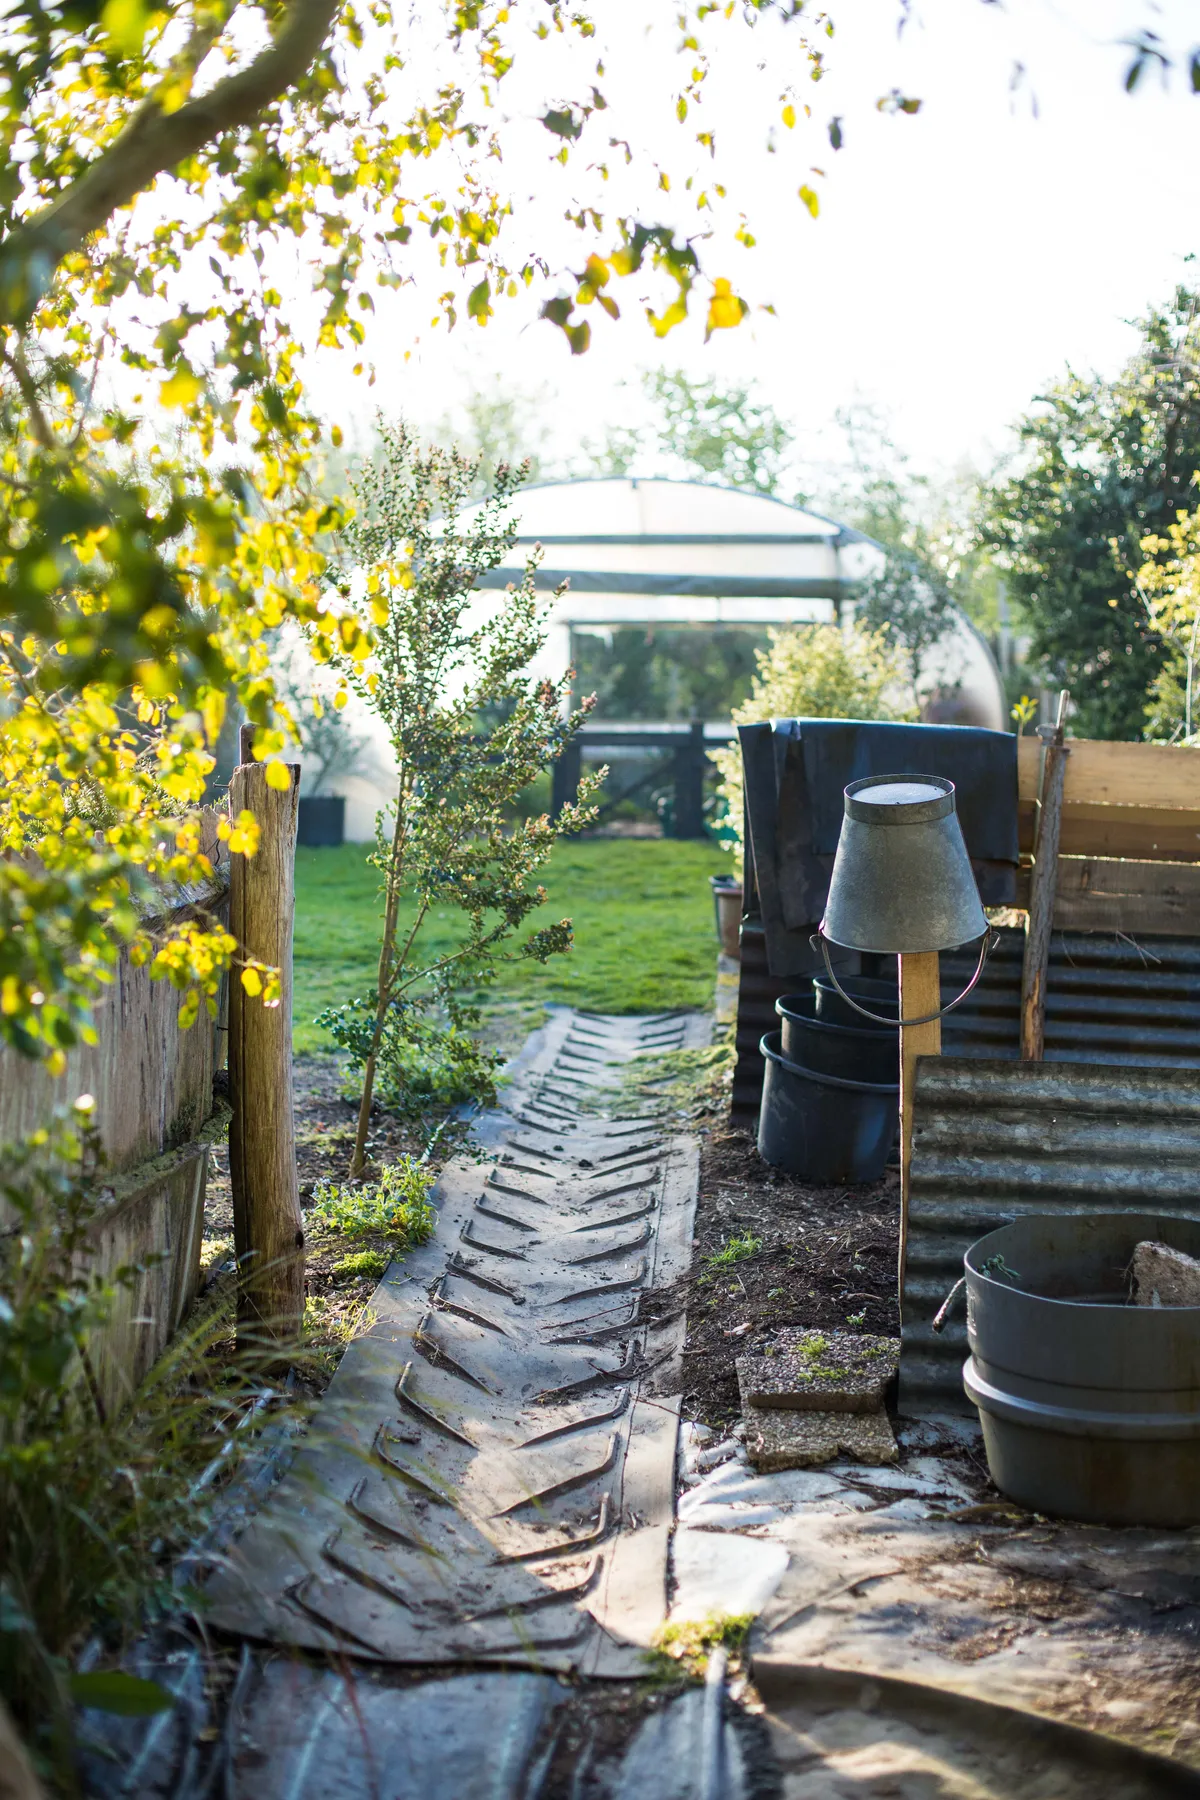 Industrial conveyor belt material used as path in Charlotte Molesworth's garden